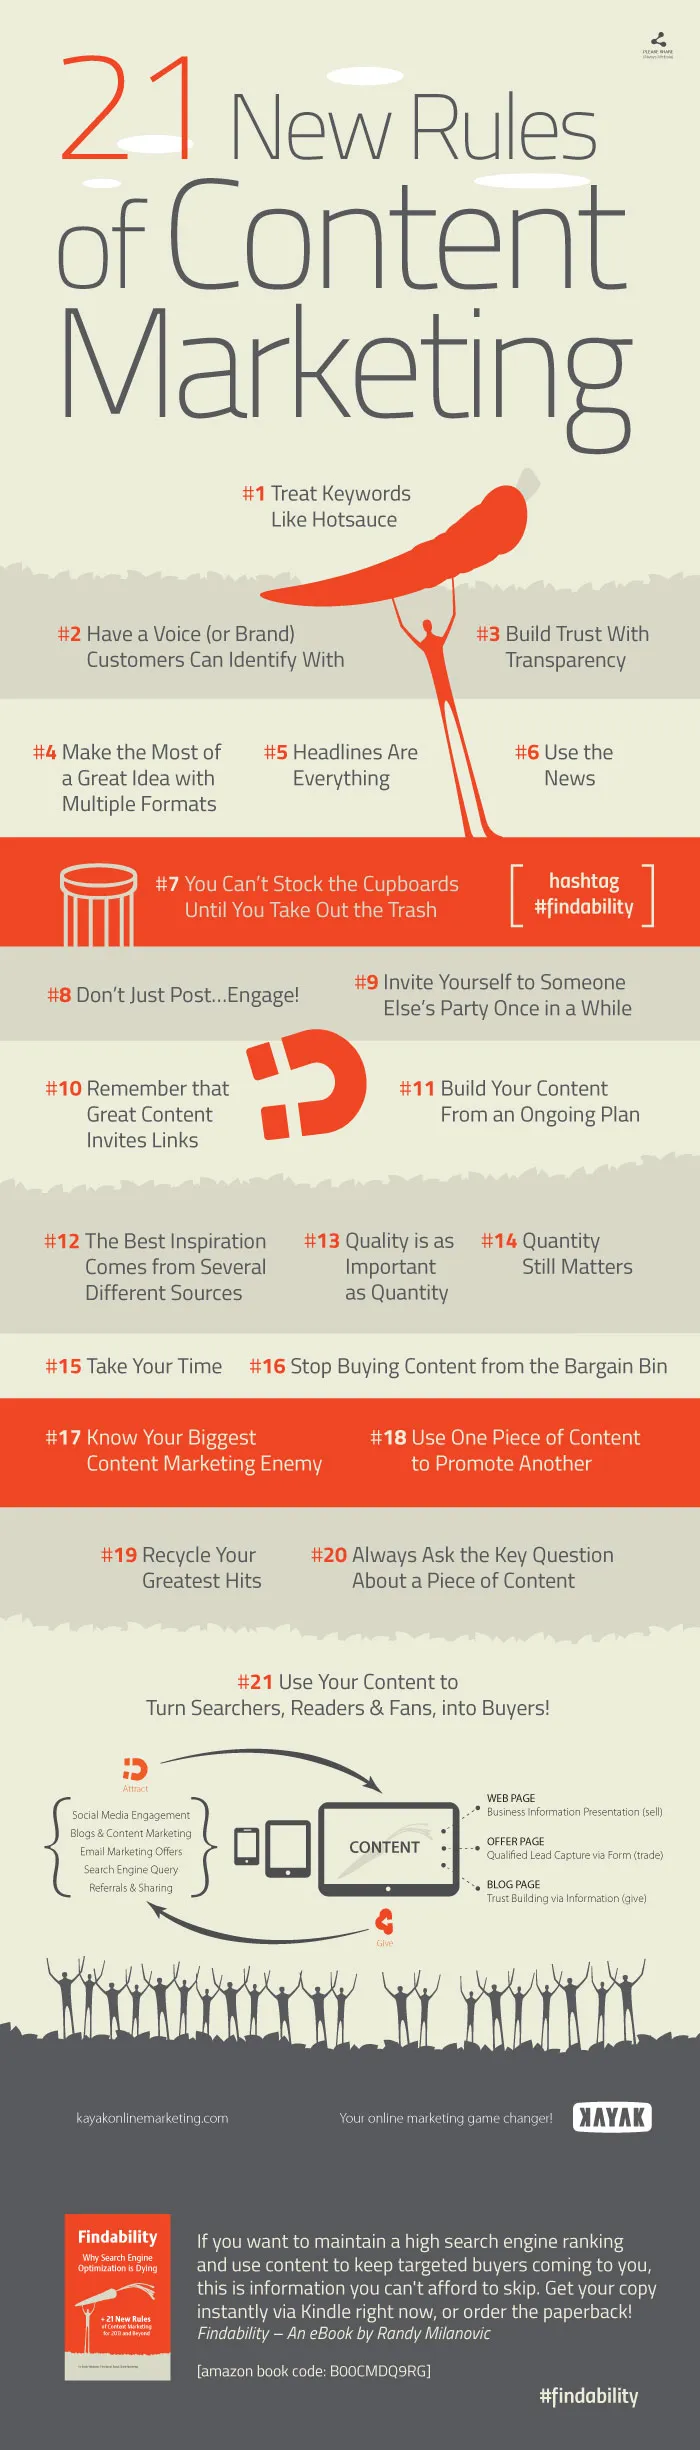 new-rules-of-content-marketing-infographic